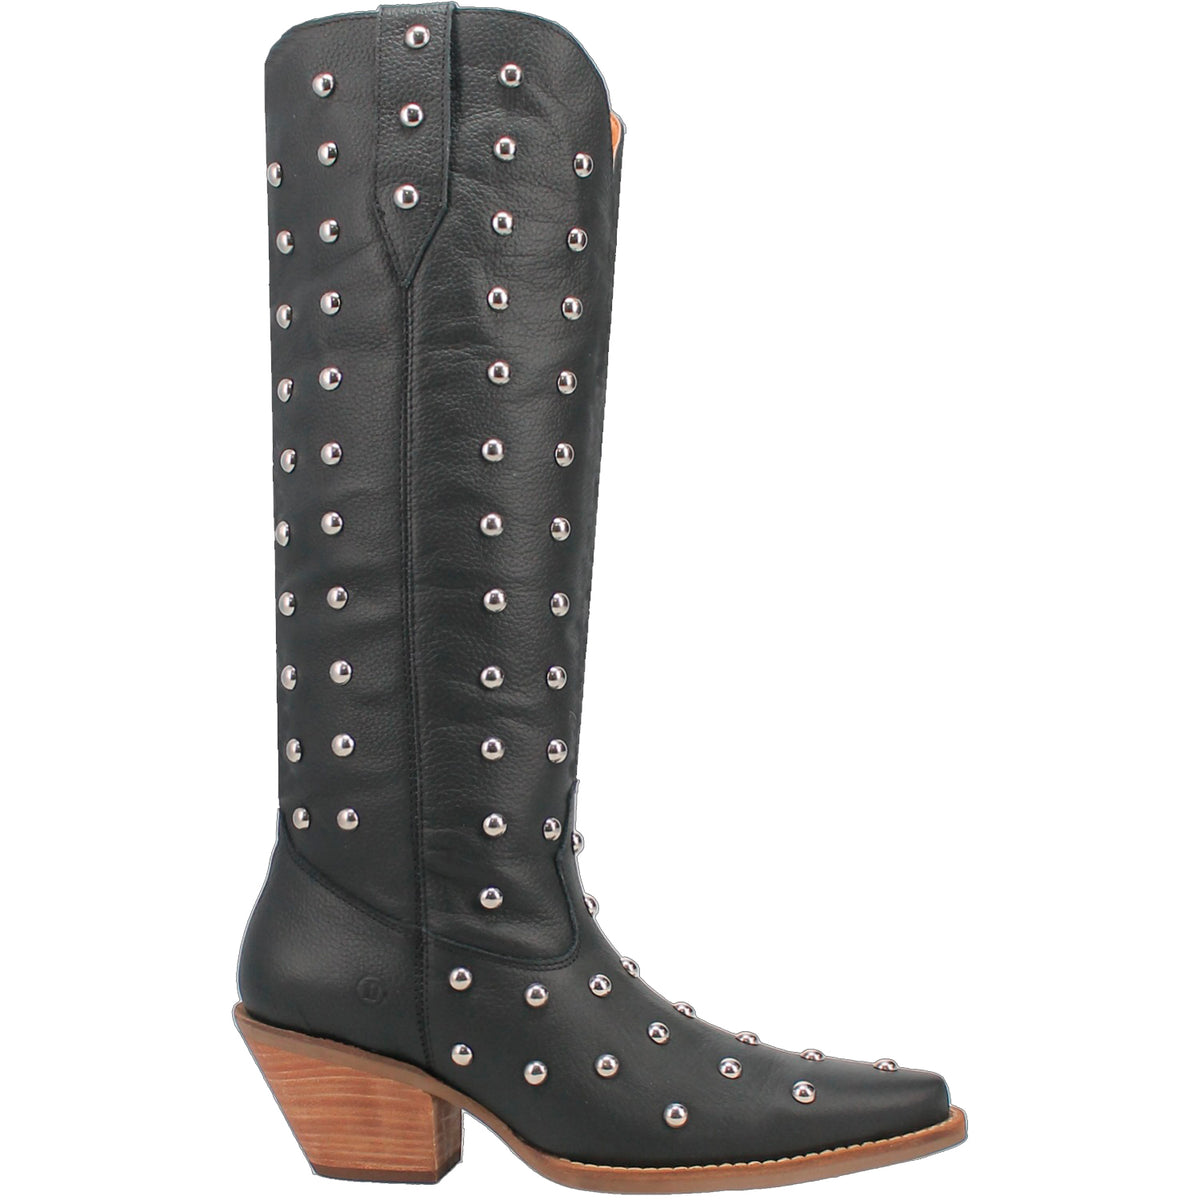 Broadway Bunny Leather Boot in Black